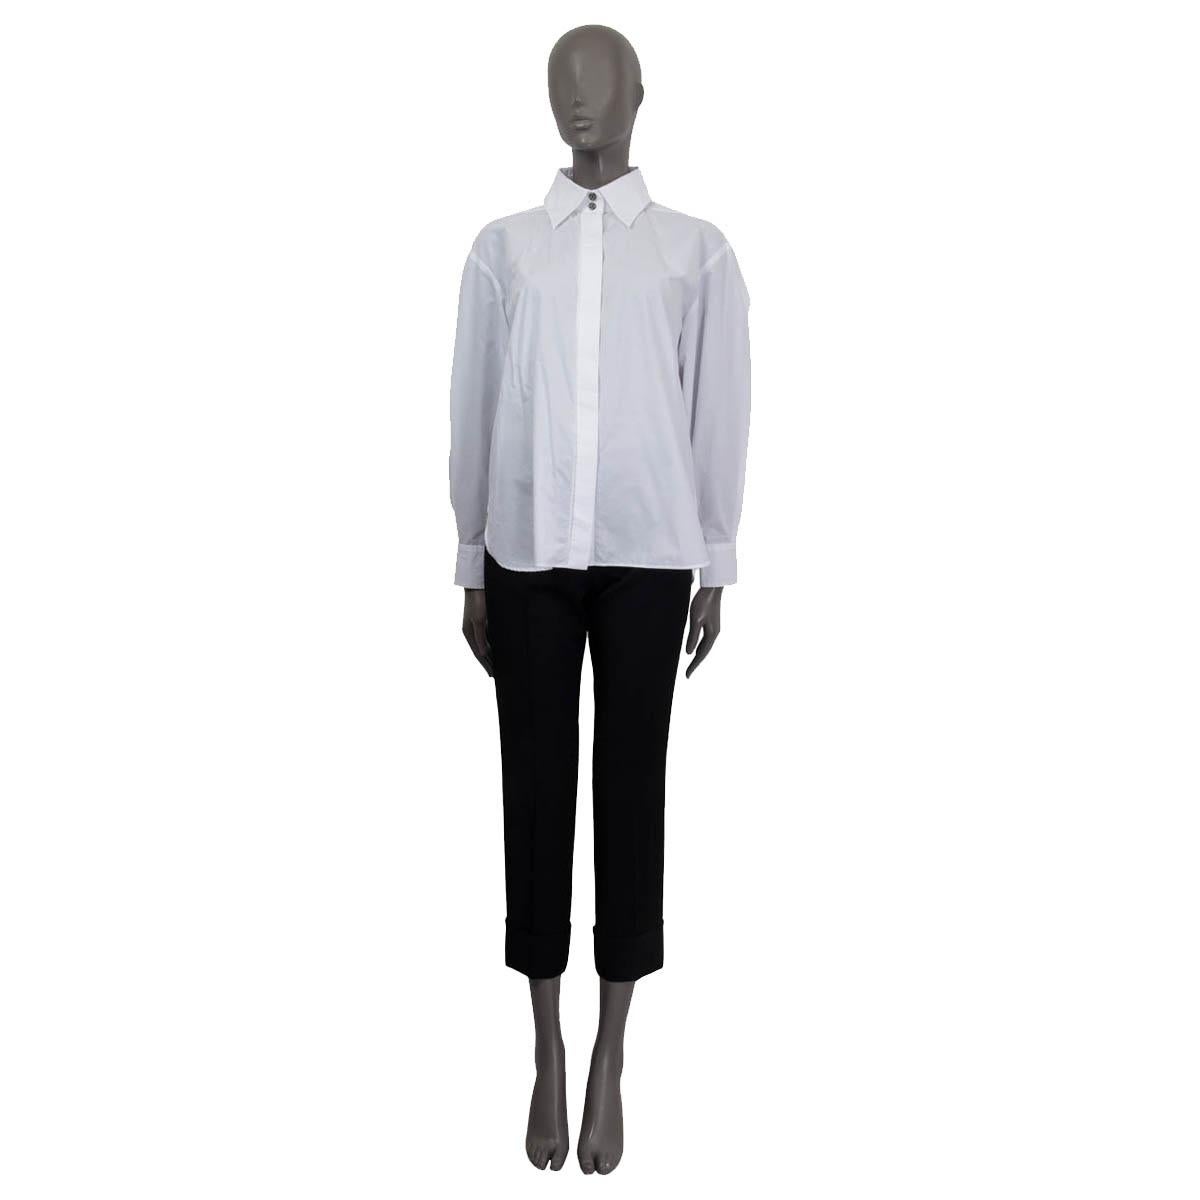 100% authentic Christian Dior sheer polka dot tunic shirt in white and black silk (assumed because tag is missing). Features batwings aChanel 2019 classic button-up shirt in white cotton (100%). Features an oversized look and 'CC' buttoned cuffs.